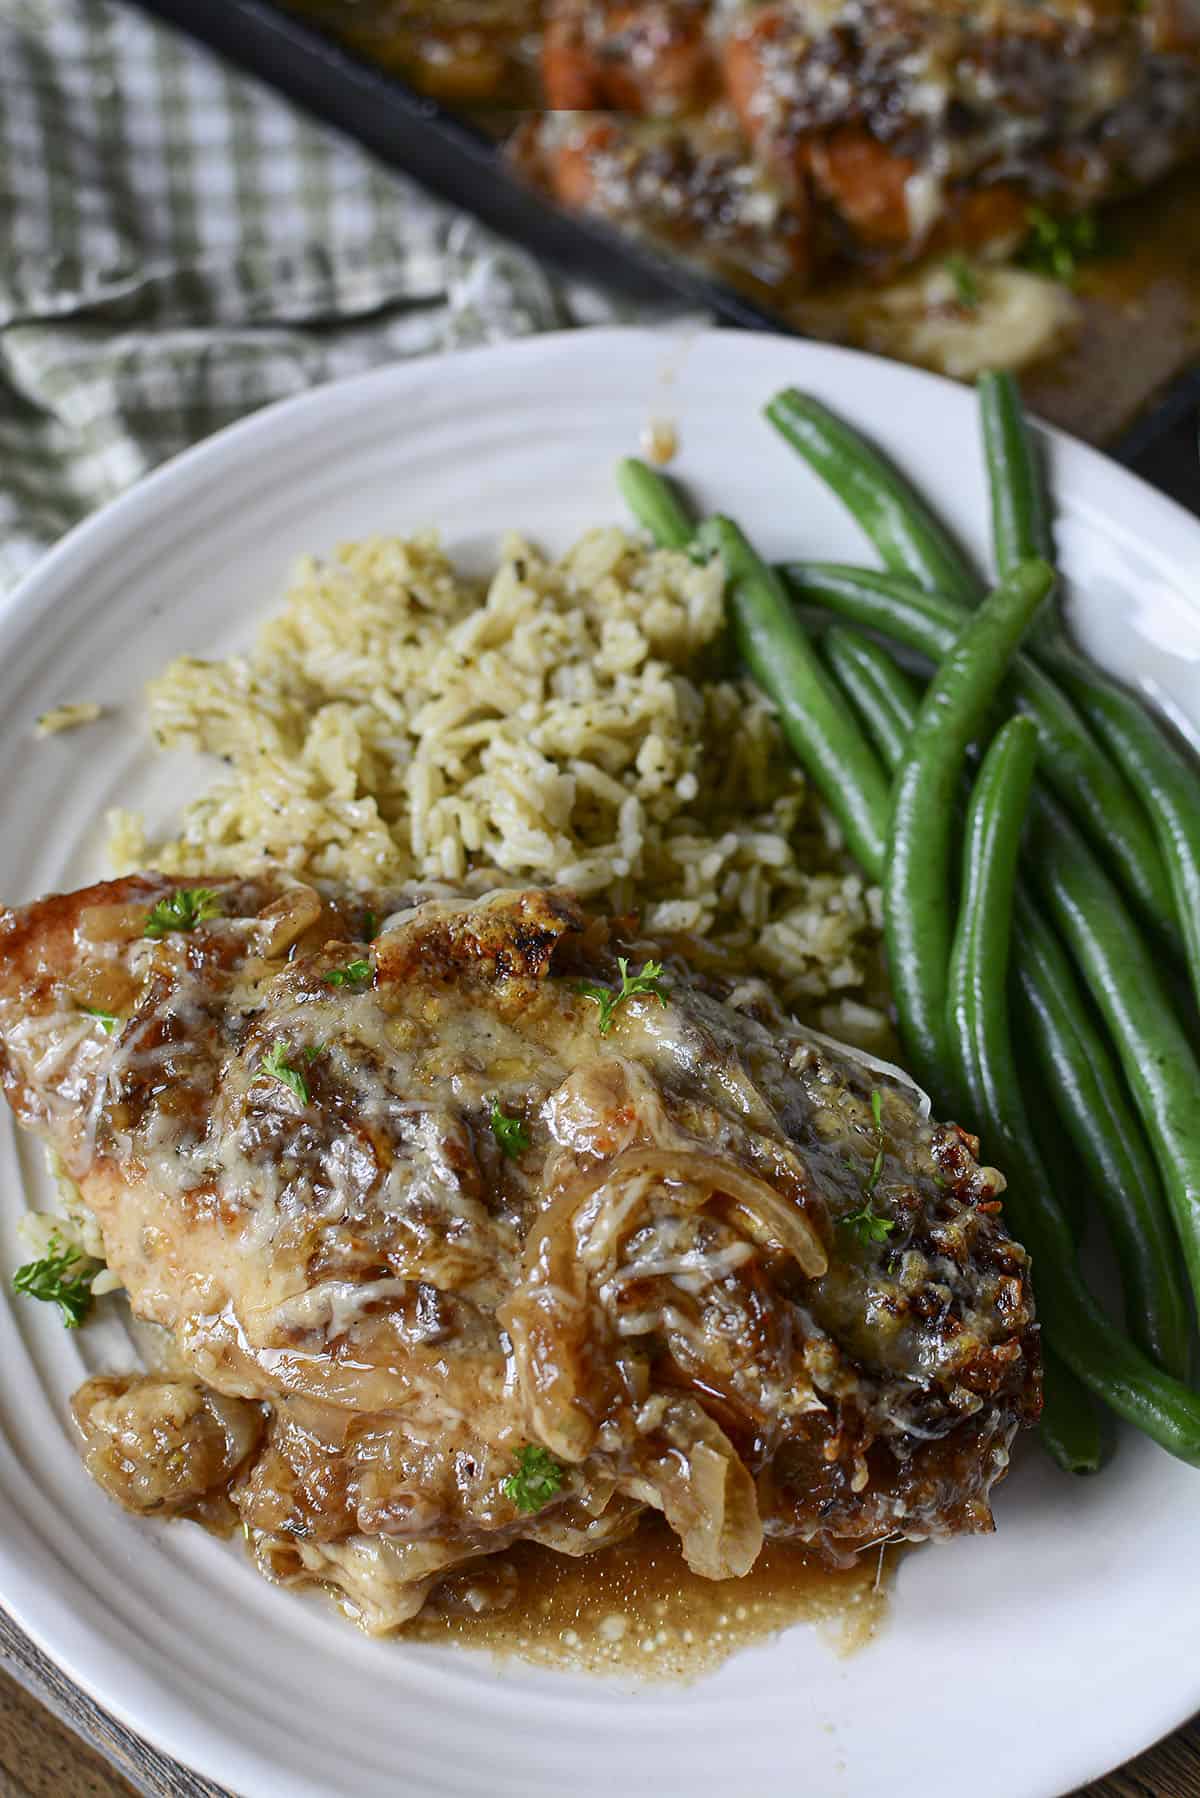 One onion chicken breast plated with green beans and rice.